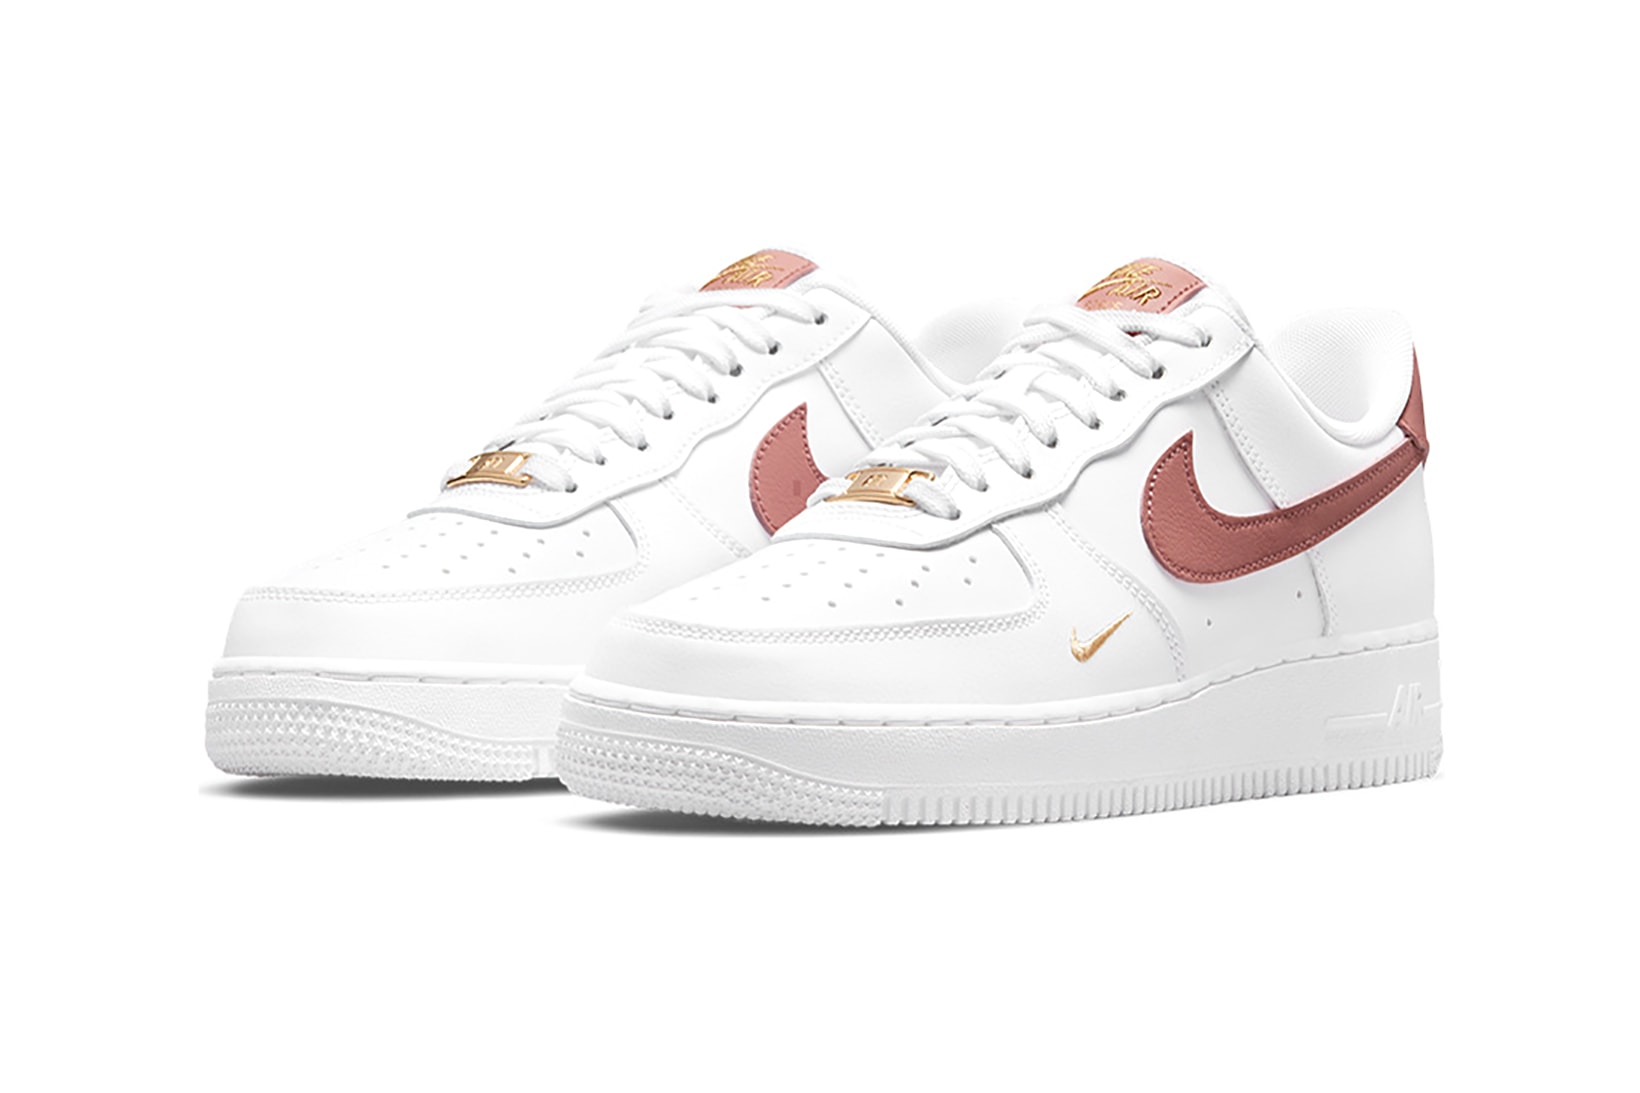 Nike Womens Sneakers Air Force 1 AF1 White Rusk Pink Footwear Kicks Shoes Lateral